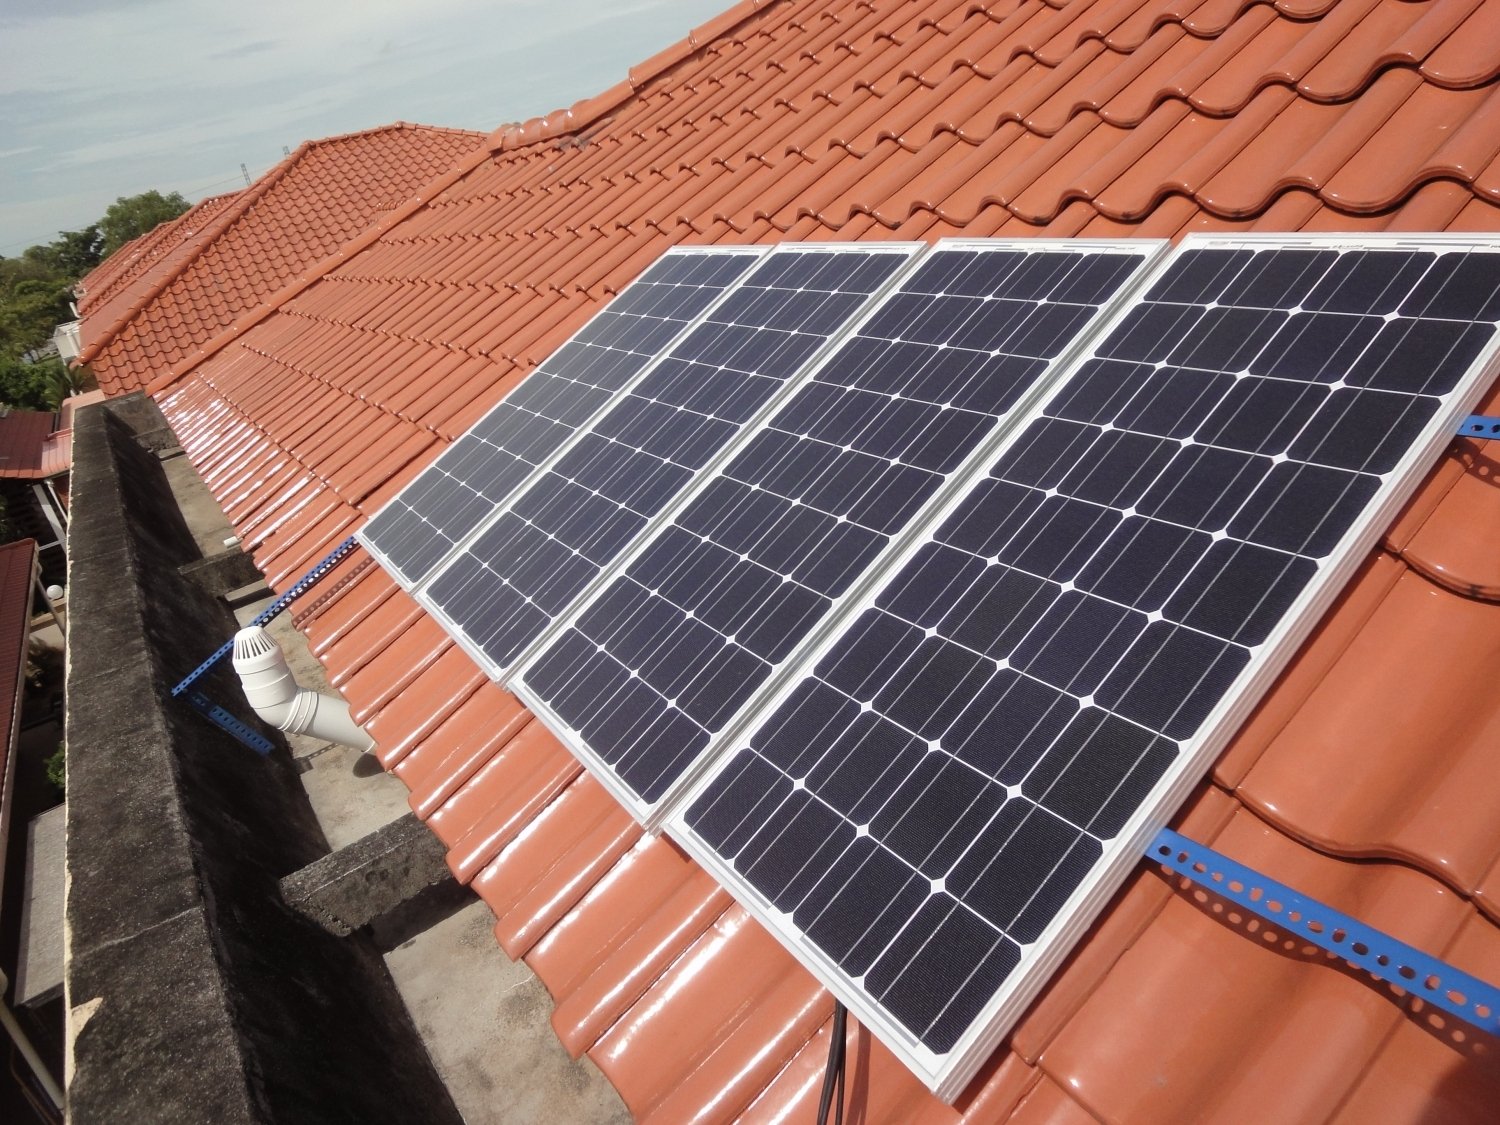 Should you buy solar panels for your home?